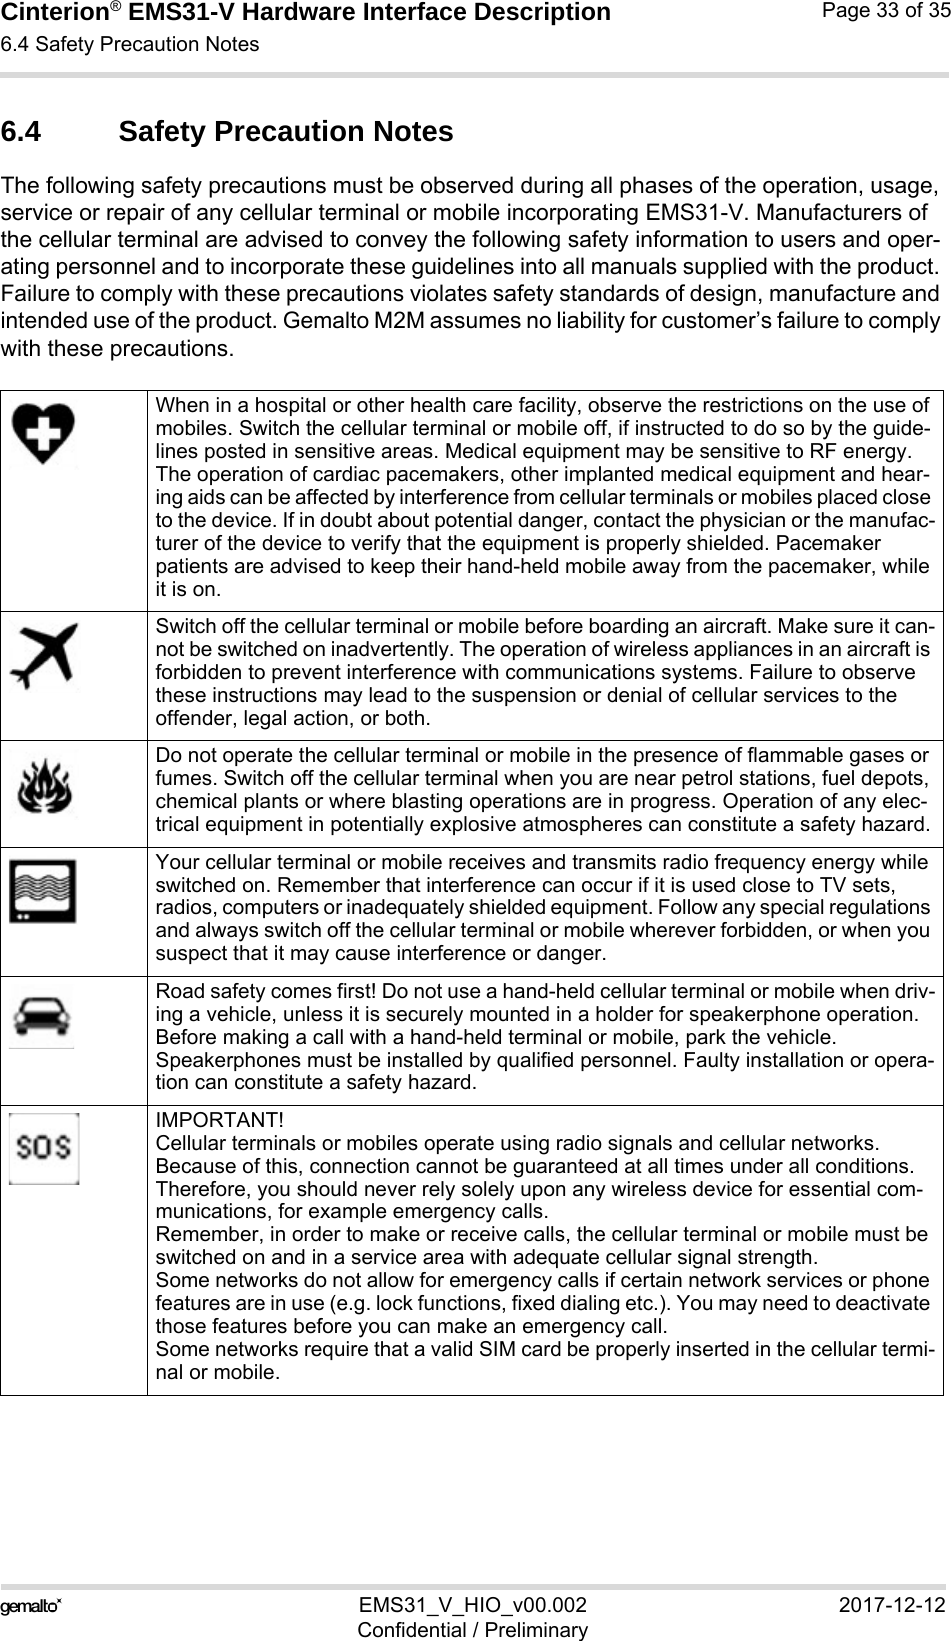 Cinterion® EMS31-V Hardware Interface Description6.4 Safety Precaution Notes33EMS31_V_HIO_v00.002 2017-12-12Confidential / PreliminaryPage 33 of 356.4 Safety Precaution NotesThe following safety precautions must be observed during all phases of the operation, usage, service or repair of any cellular terminal or mobile incorporating EMS31-V. Manufacturers of the cellular terminal are advised to convey the following safety information to users and oper-ating personnel and to incorporate these guidelines into all manuals supplied with the product. Failure to comply with these precautions violates safety standards of design, manufacture and intended use of the product. Gemalto M2M assumes no liability for customer’s failure to comply with these precautions.When in a hospital or other health care facility, observe the restrictions on the use of mobiles. Switch the cellular terminal or mobile off, if instructed to do so by the guide-lines posted in sensitive areas. Medical equipment may be sensitive to RF energy. The operation of cardiac pacemakers, other implanted medical equipment and hear-ing aids can be affected by interference from cellular terminals or mobiles placed close to the device. If in doubt about potential danger, contact the physician or the manufac-turer of the device to verify that the equipment is properly shielded. Pacemaker patients are advised to keep their hand-held mobile away from the pacemaker, while it is on. Switch off the cellular terminal or mobile before boarding an aircraft. Make sure it can-not be switched on inadvertently. The operation of wireless appliances in an aircraft is forbidden to prevent interference with communications systems. Failure to observe these instructions may lead to the suspension or denial of cellular services to the offender, legal action, or both.Do not operate the cellular terminal or mobile in the presence of flammable gases or fumes. Switch off the cellular terminal when you are near petrol stations, fuel depots, chemical plants or where blasting operations are in progress. Operation of any elec-trical equipment in potentially explosive atmospheres can constitute a safety hazard.Your cellular terminal or mobile receives and transmits radio frequency energy while switched on. Remember that interference can occur if it is used close to TV sets, radios, computers or inadequately shielded equipment. Follow any special regulations and always switch off the cellular terminal or mobile wherever forbidden, or when you suspect that it may cause interference or danger.Road safety comes first! Do not use a hand-held cellular terminal or mobile when driv-ing a vehicle, unless it is securely mounted in a holder for speakerphone operation. Before making a call with a hand-held terminal or mobile, park the vehicle. Speakerphones must be installed by qualified personnel. Faulty installation or opera-tion can constitute a safety hazard.IMPORTANT!Cellular terminals or mobiles operate using radio signals and cellular networks. Because of this, connection cannot be guaranteed at all times under all conditions. Therefore, you should never rely solely upon any wireless device for essential com-munications, for example emergency calls. Remember, in order to make or receive calls, the cellular terminal or mobile must be switched on and in a service area with adequate cellular signal strength. Some networks do not allow for emergency calls if certain network services or phone features are in use (e.g. lock functions, fixed dialing etc.). You may need to deactivate those features before you can make an emergency call.Some networks require that a valid SIM card be properly inserted in the cellular termi-nal or mobile.